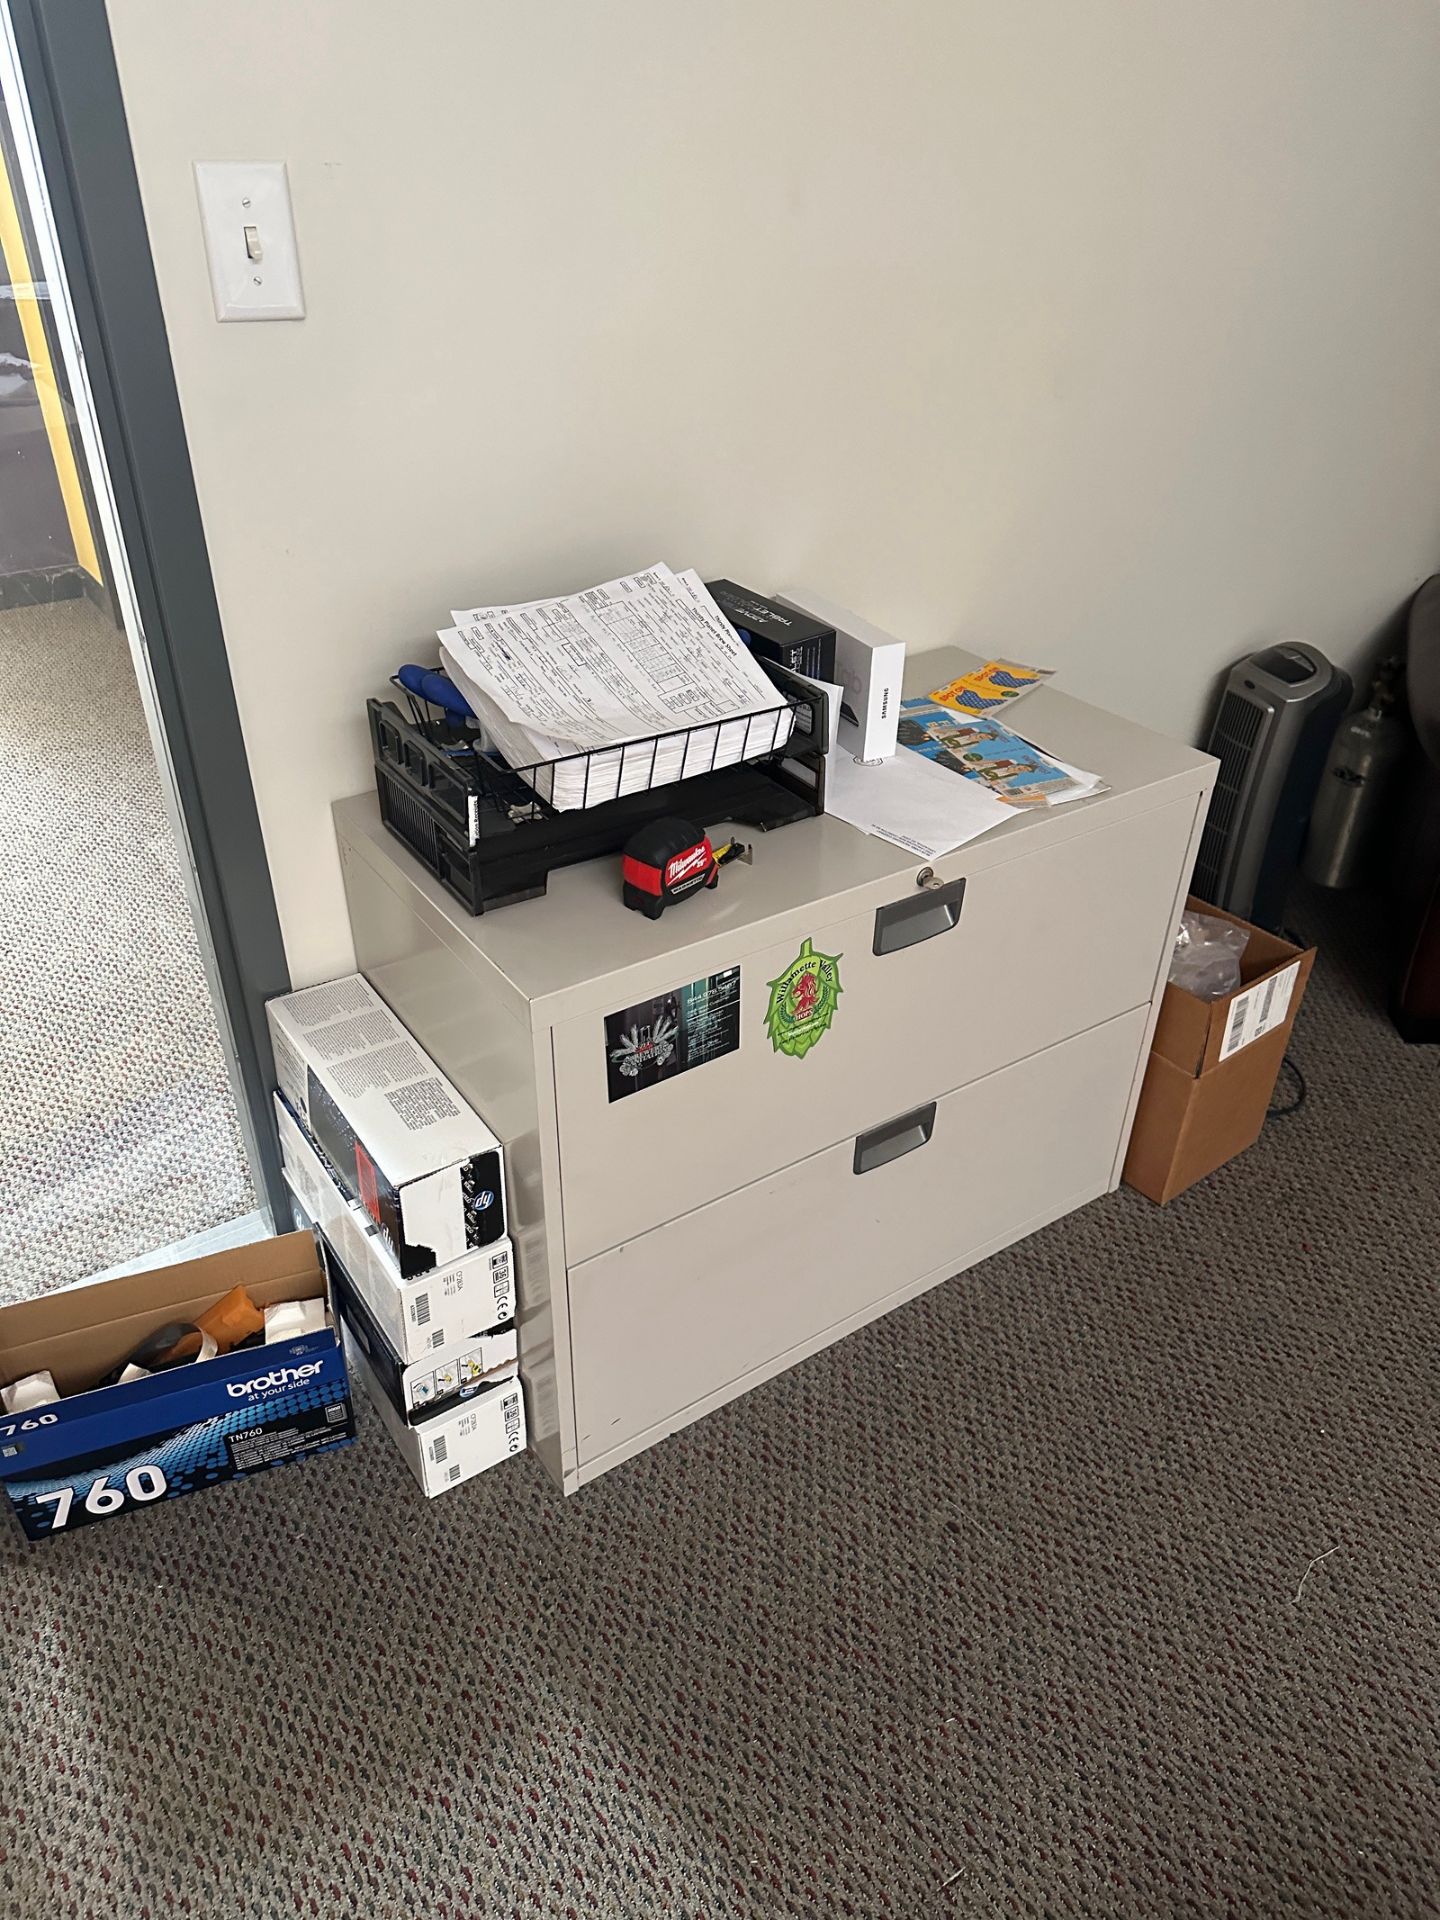 Lot of Contents of Office - 3' x 6' Desk - File Cabinet 21" x 3' - 42" Diameter Tab | Rig Fee $225 - Image 3 of 3